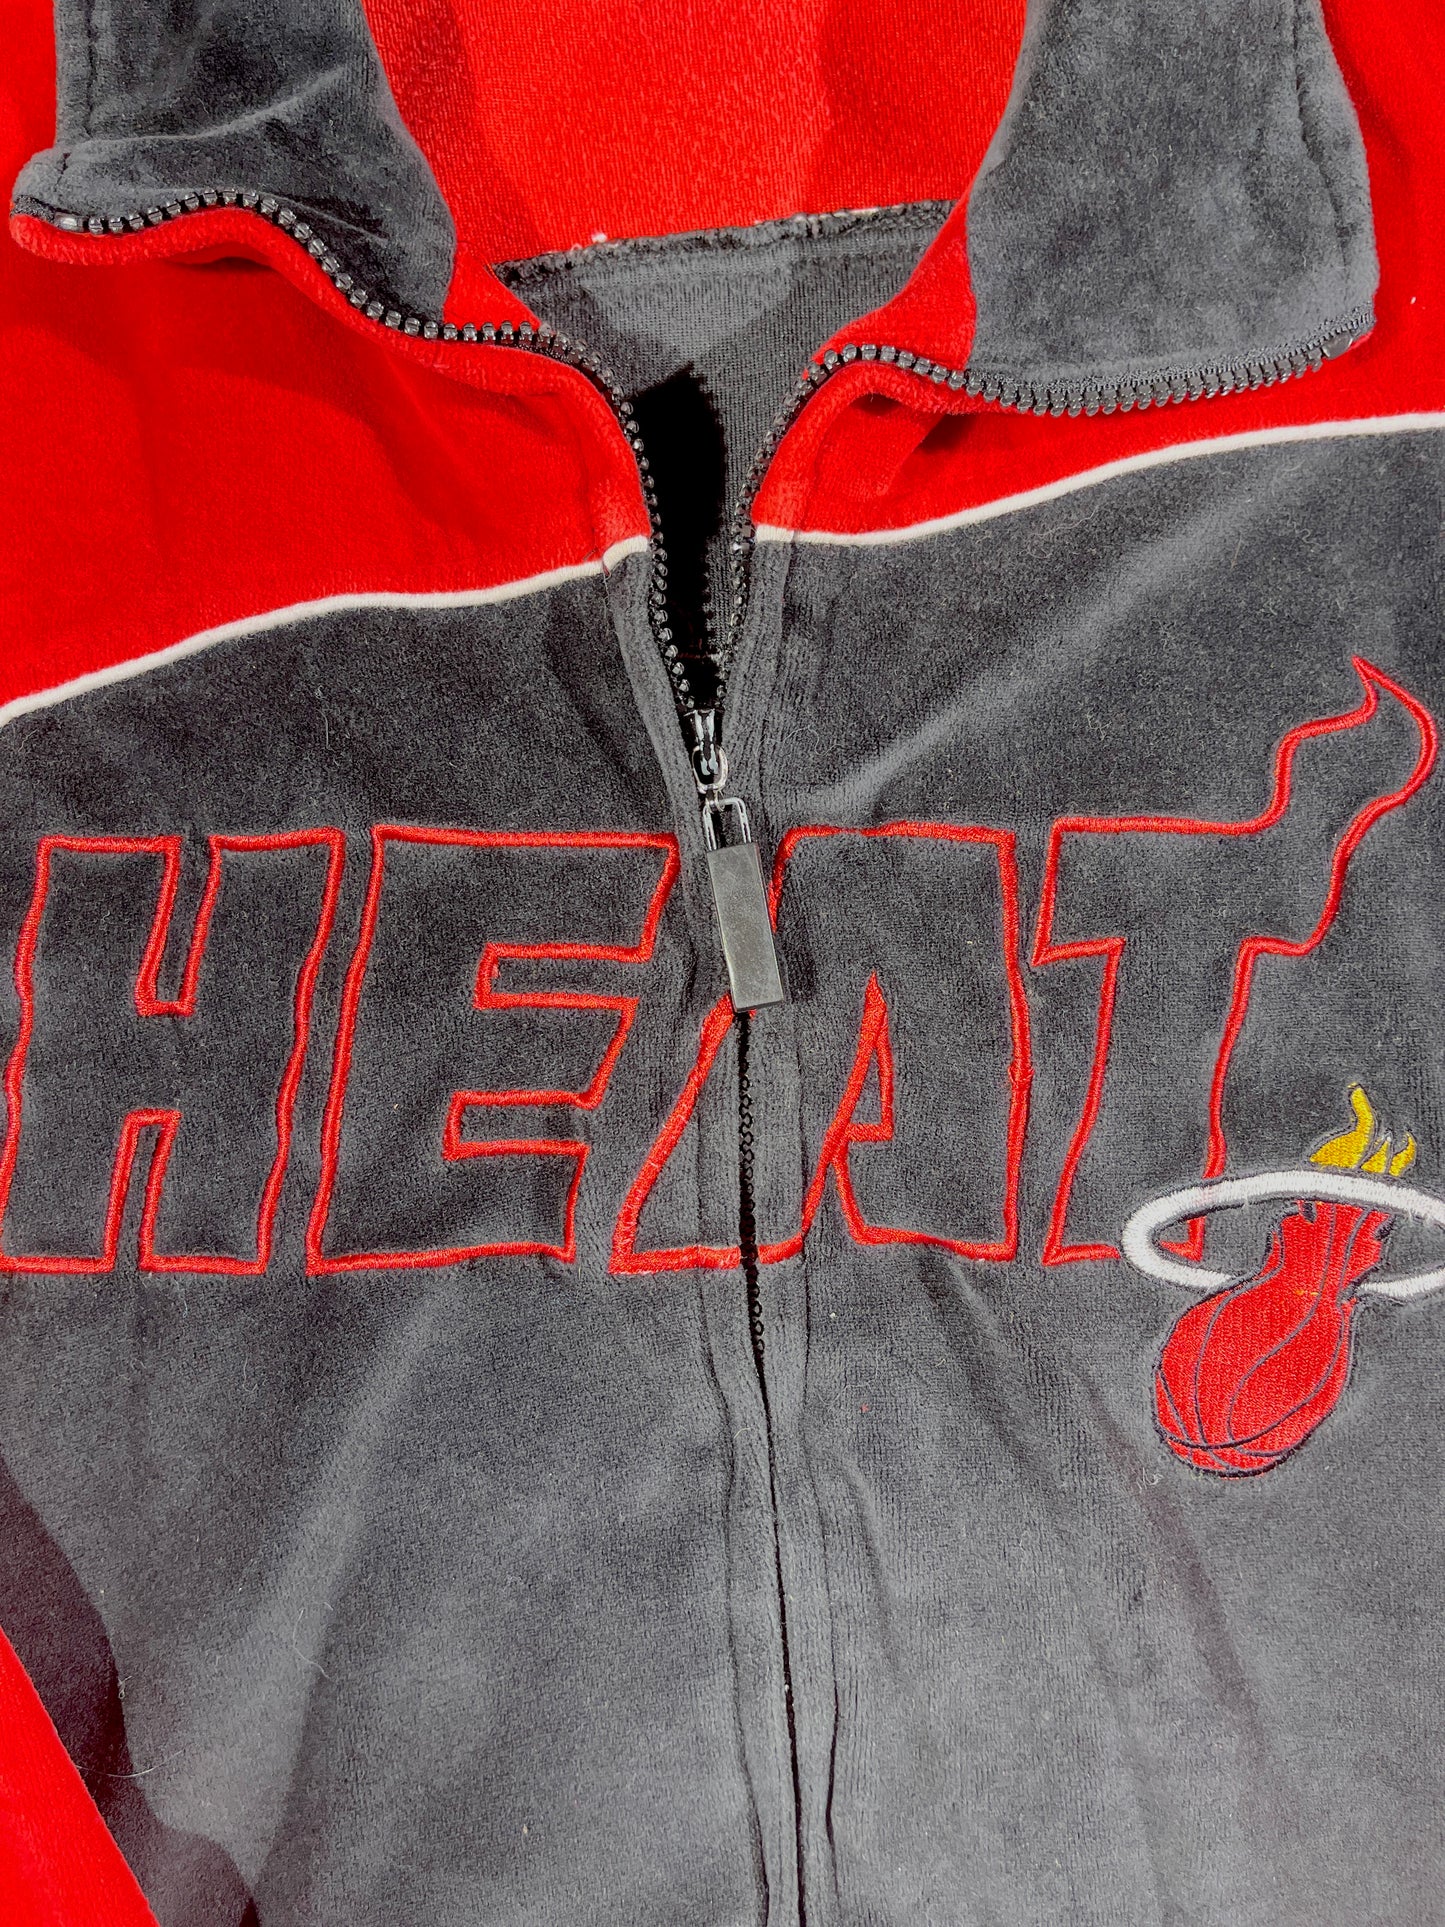 Miami Heat Track Jacket Mens Red and Black Velour Basketball 3XL NBA